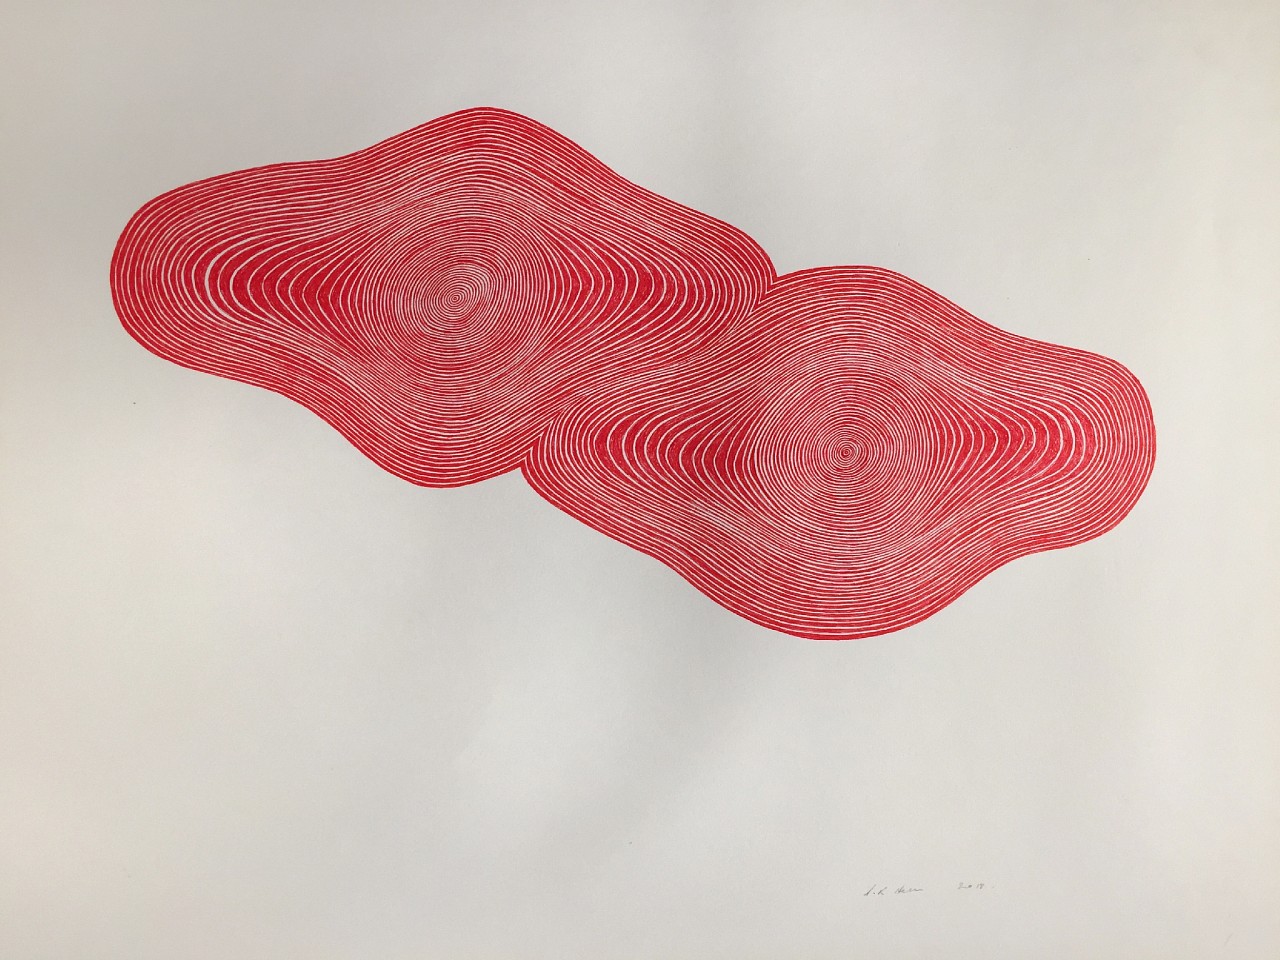 Stewart Helm, Red-Doubled Eye Shape, 2019
colored inks on paper, 20" x 27.5" unframed 
SH-610
Price Upon Request